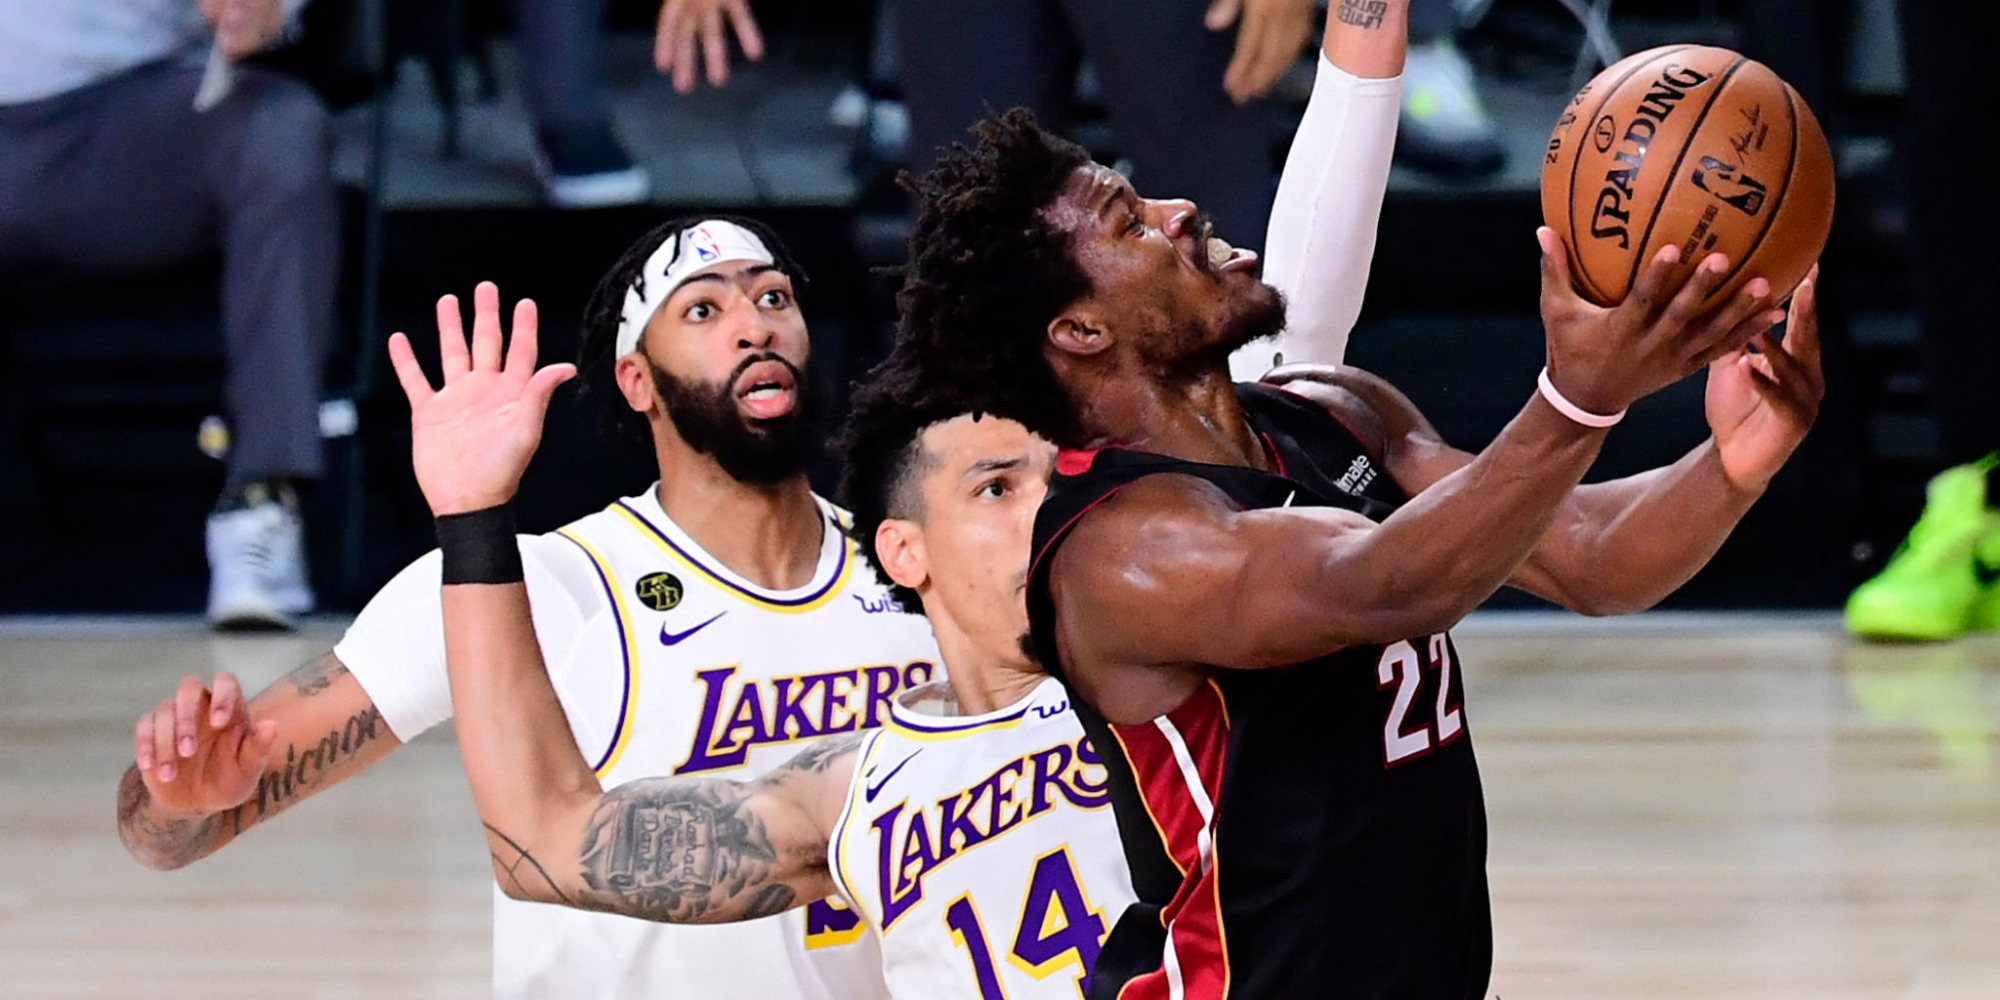 Lakers vs. Heat, Game 3 of NBA Finals: Live updates and score - Los Angeles Times